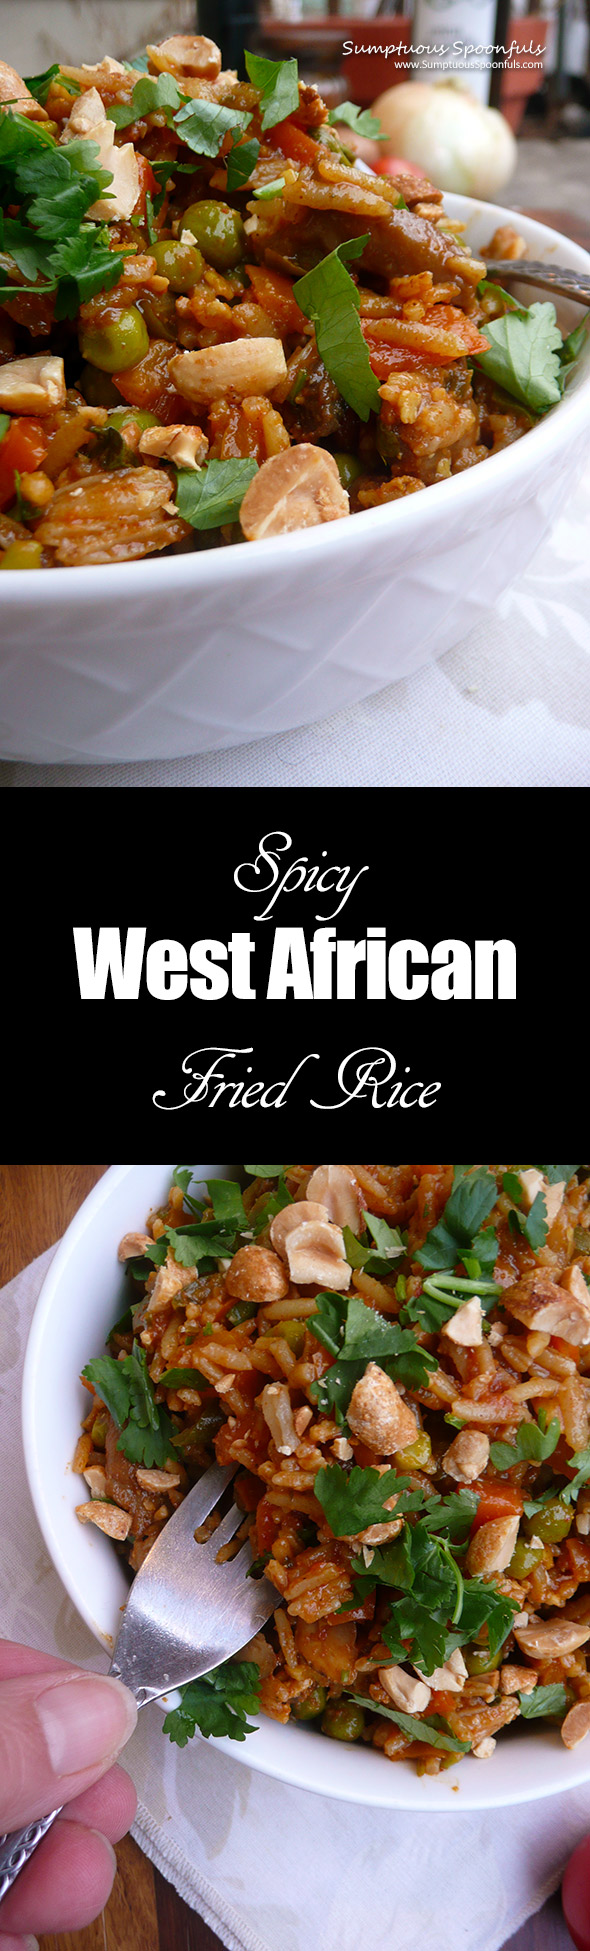 Spicy West African Fried Rice ~ Sumptuous Spoonfuls #rice #recipe